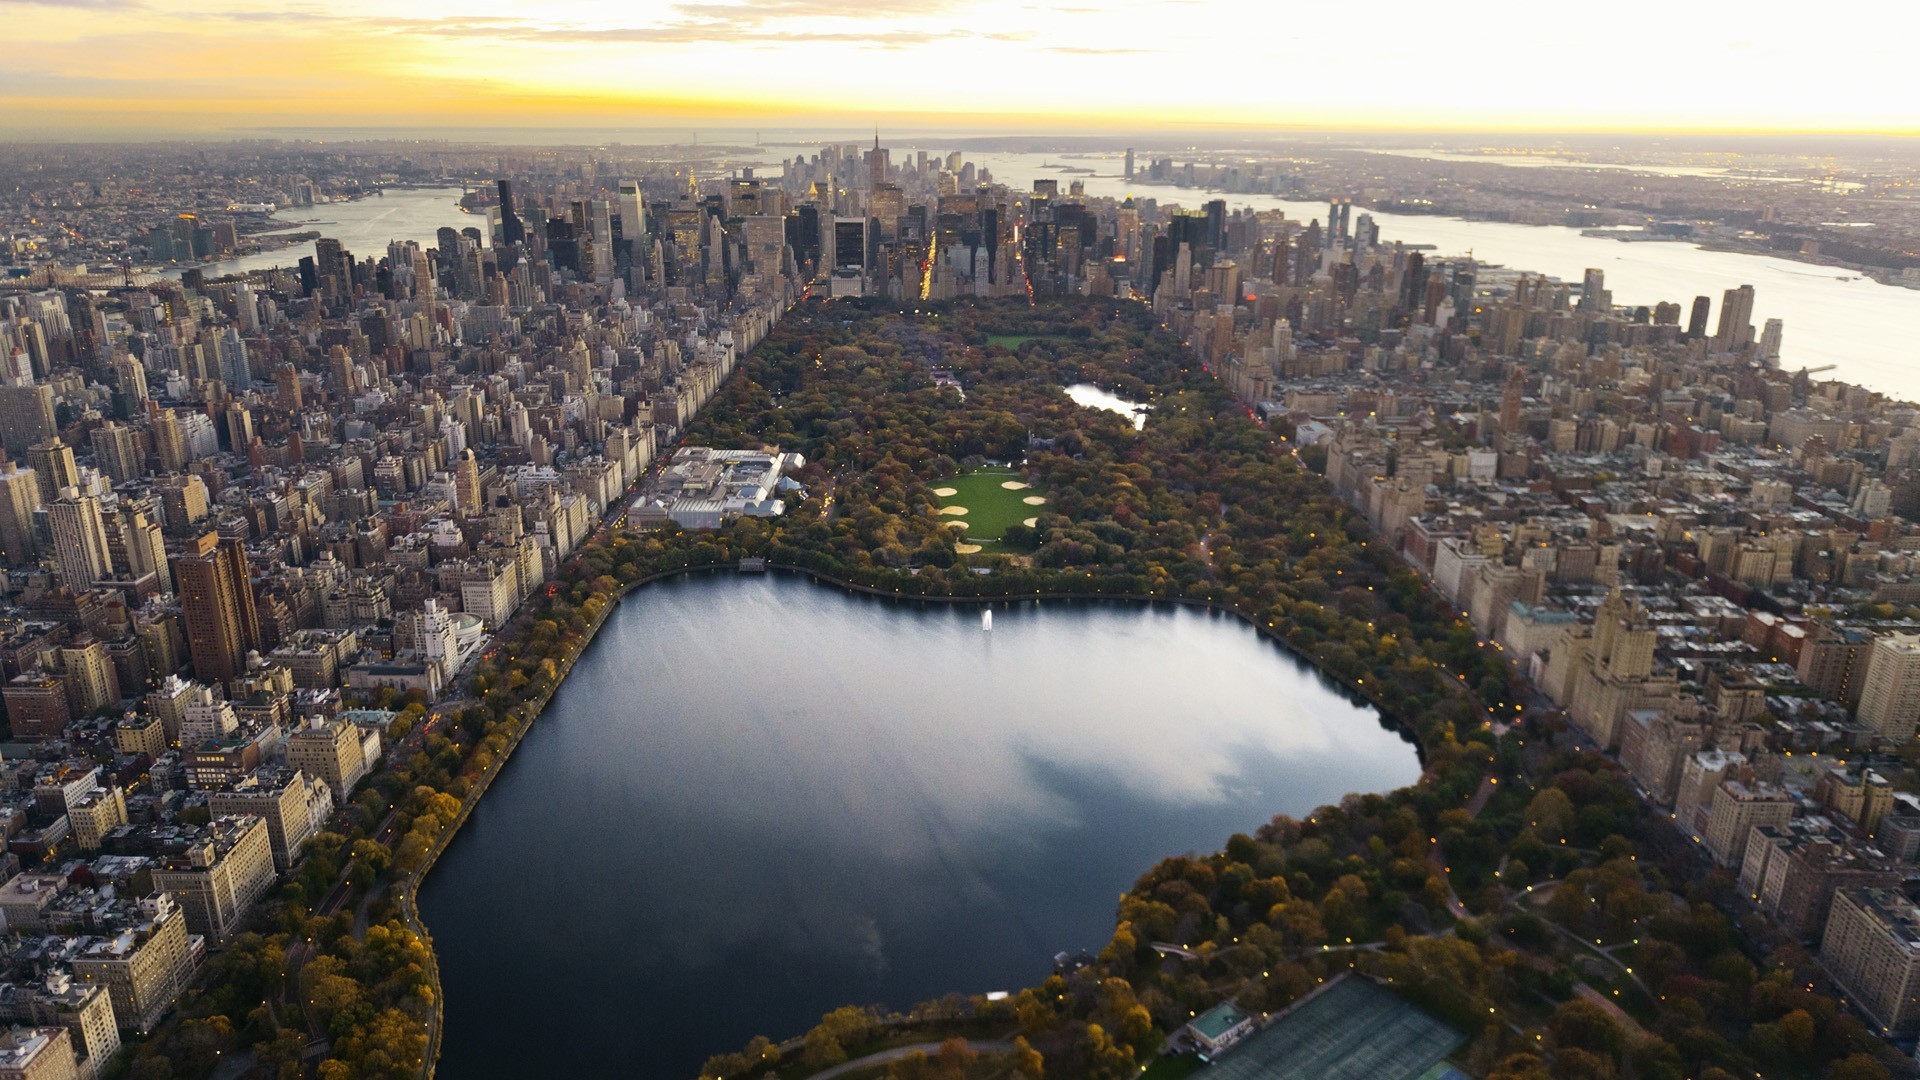 General 1920x1080 New York City city building Central Park USA aerial view cityscape